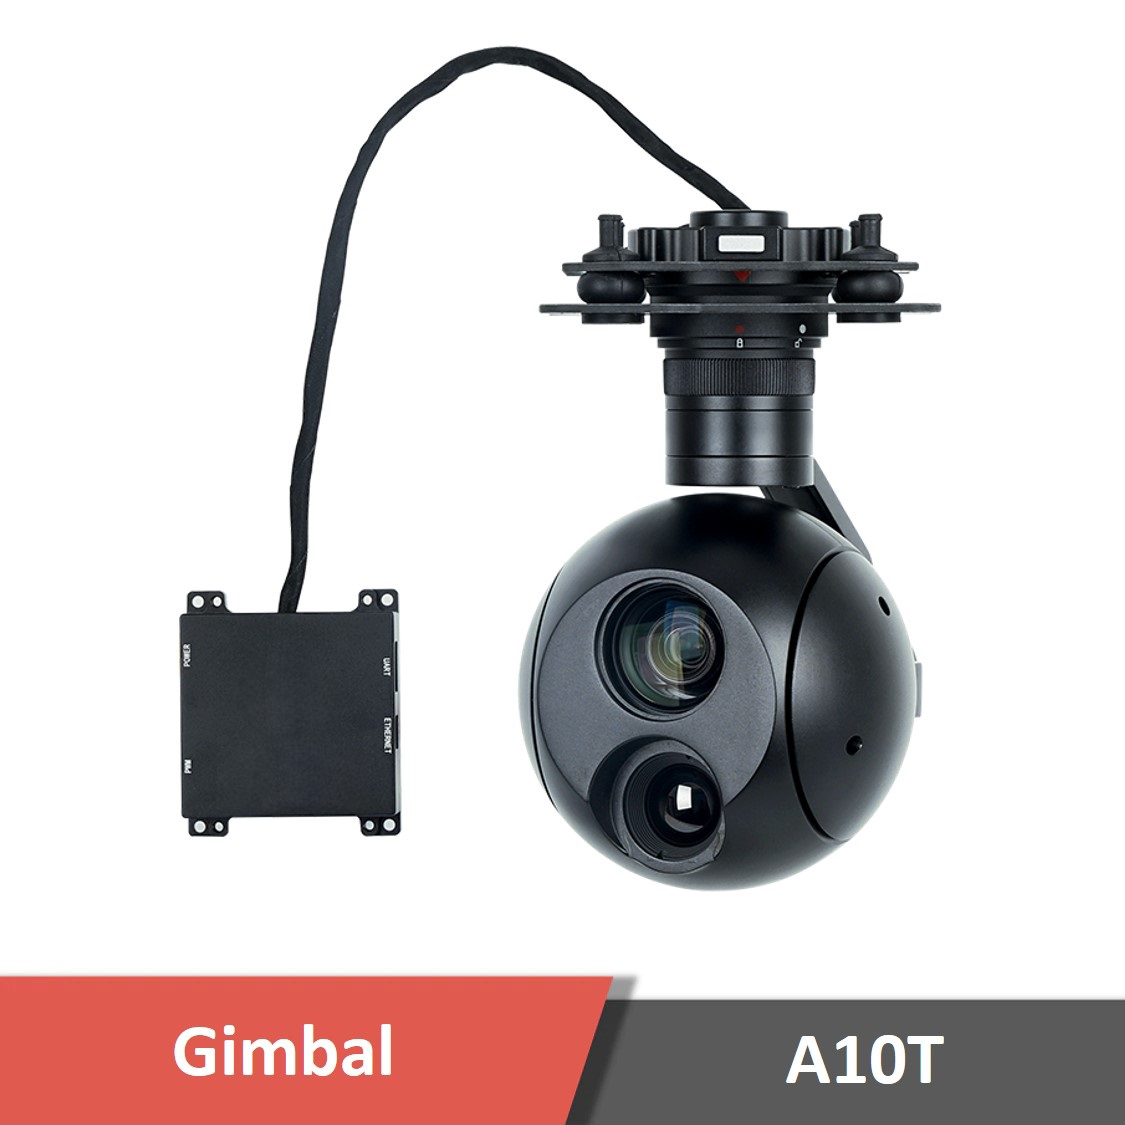 A10t lr1 - a40t gimbal camera - motionew - 2